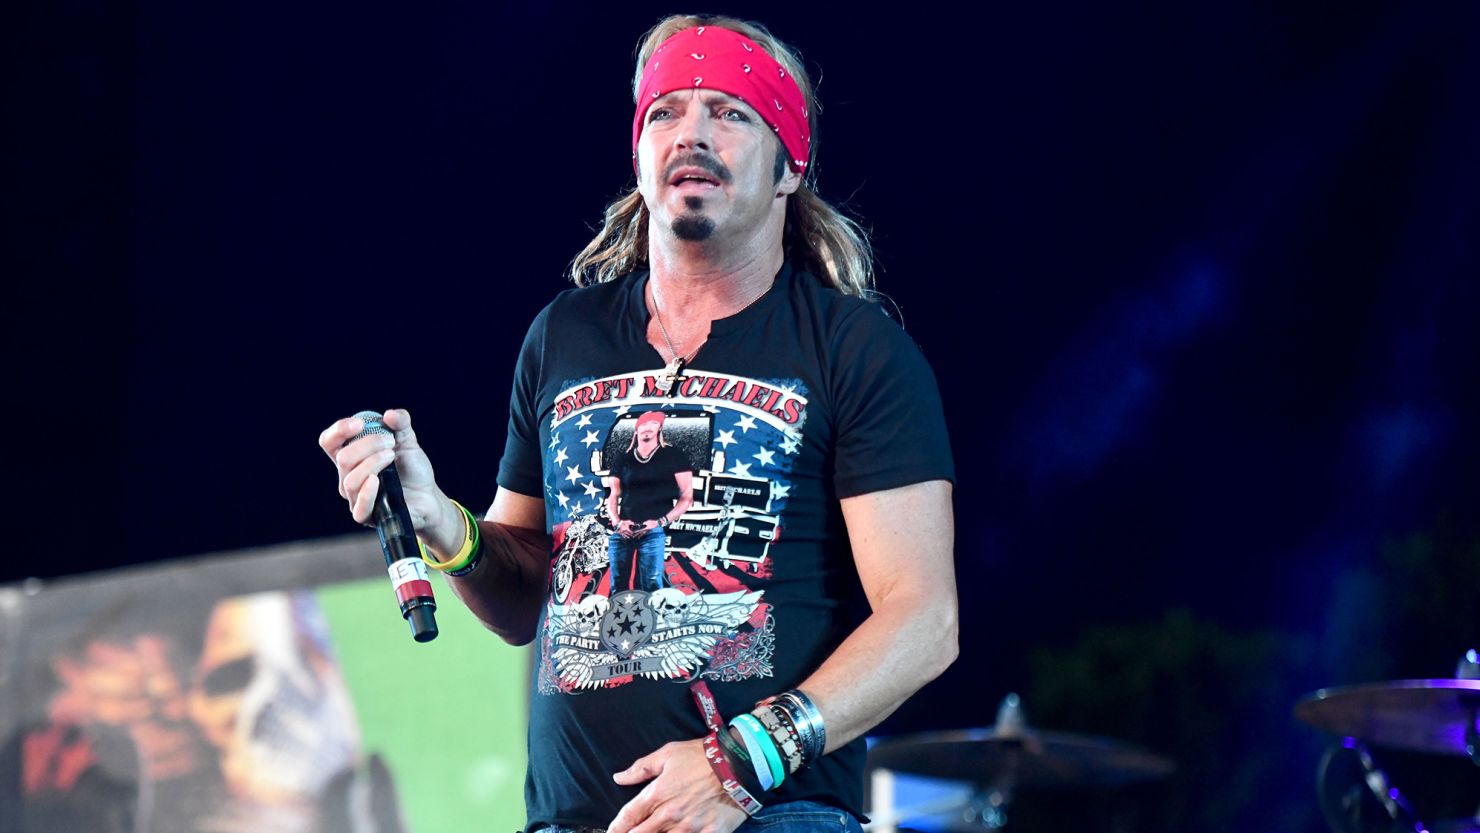 INDIO, CALIFORNIA - APRIL 26: Musician Bret Michaels, singer of the band Poison, performs onstage during Day 1 of the 2019 Stagecoach Country Music Festival on April 26, 2019 in Indio, California. (Photo by Scott Dudelson/Getty Images for Stagecoach)